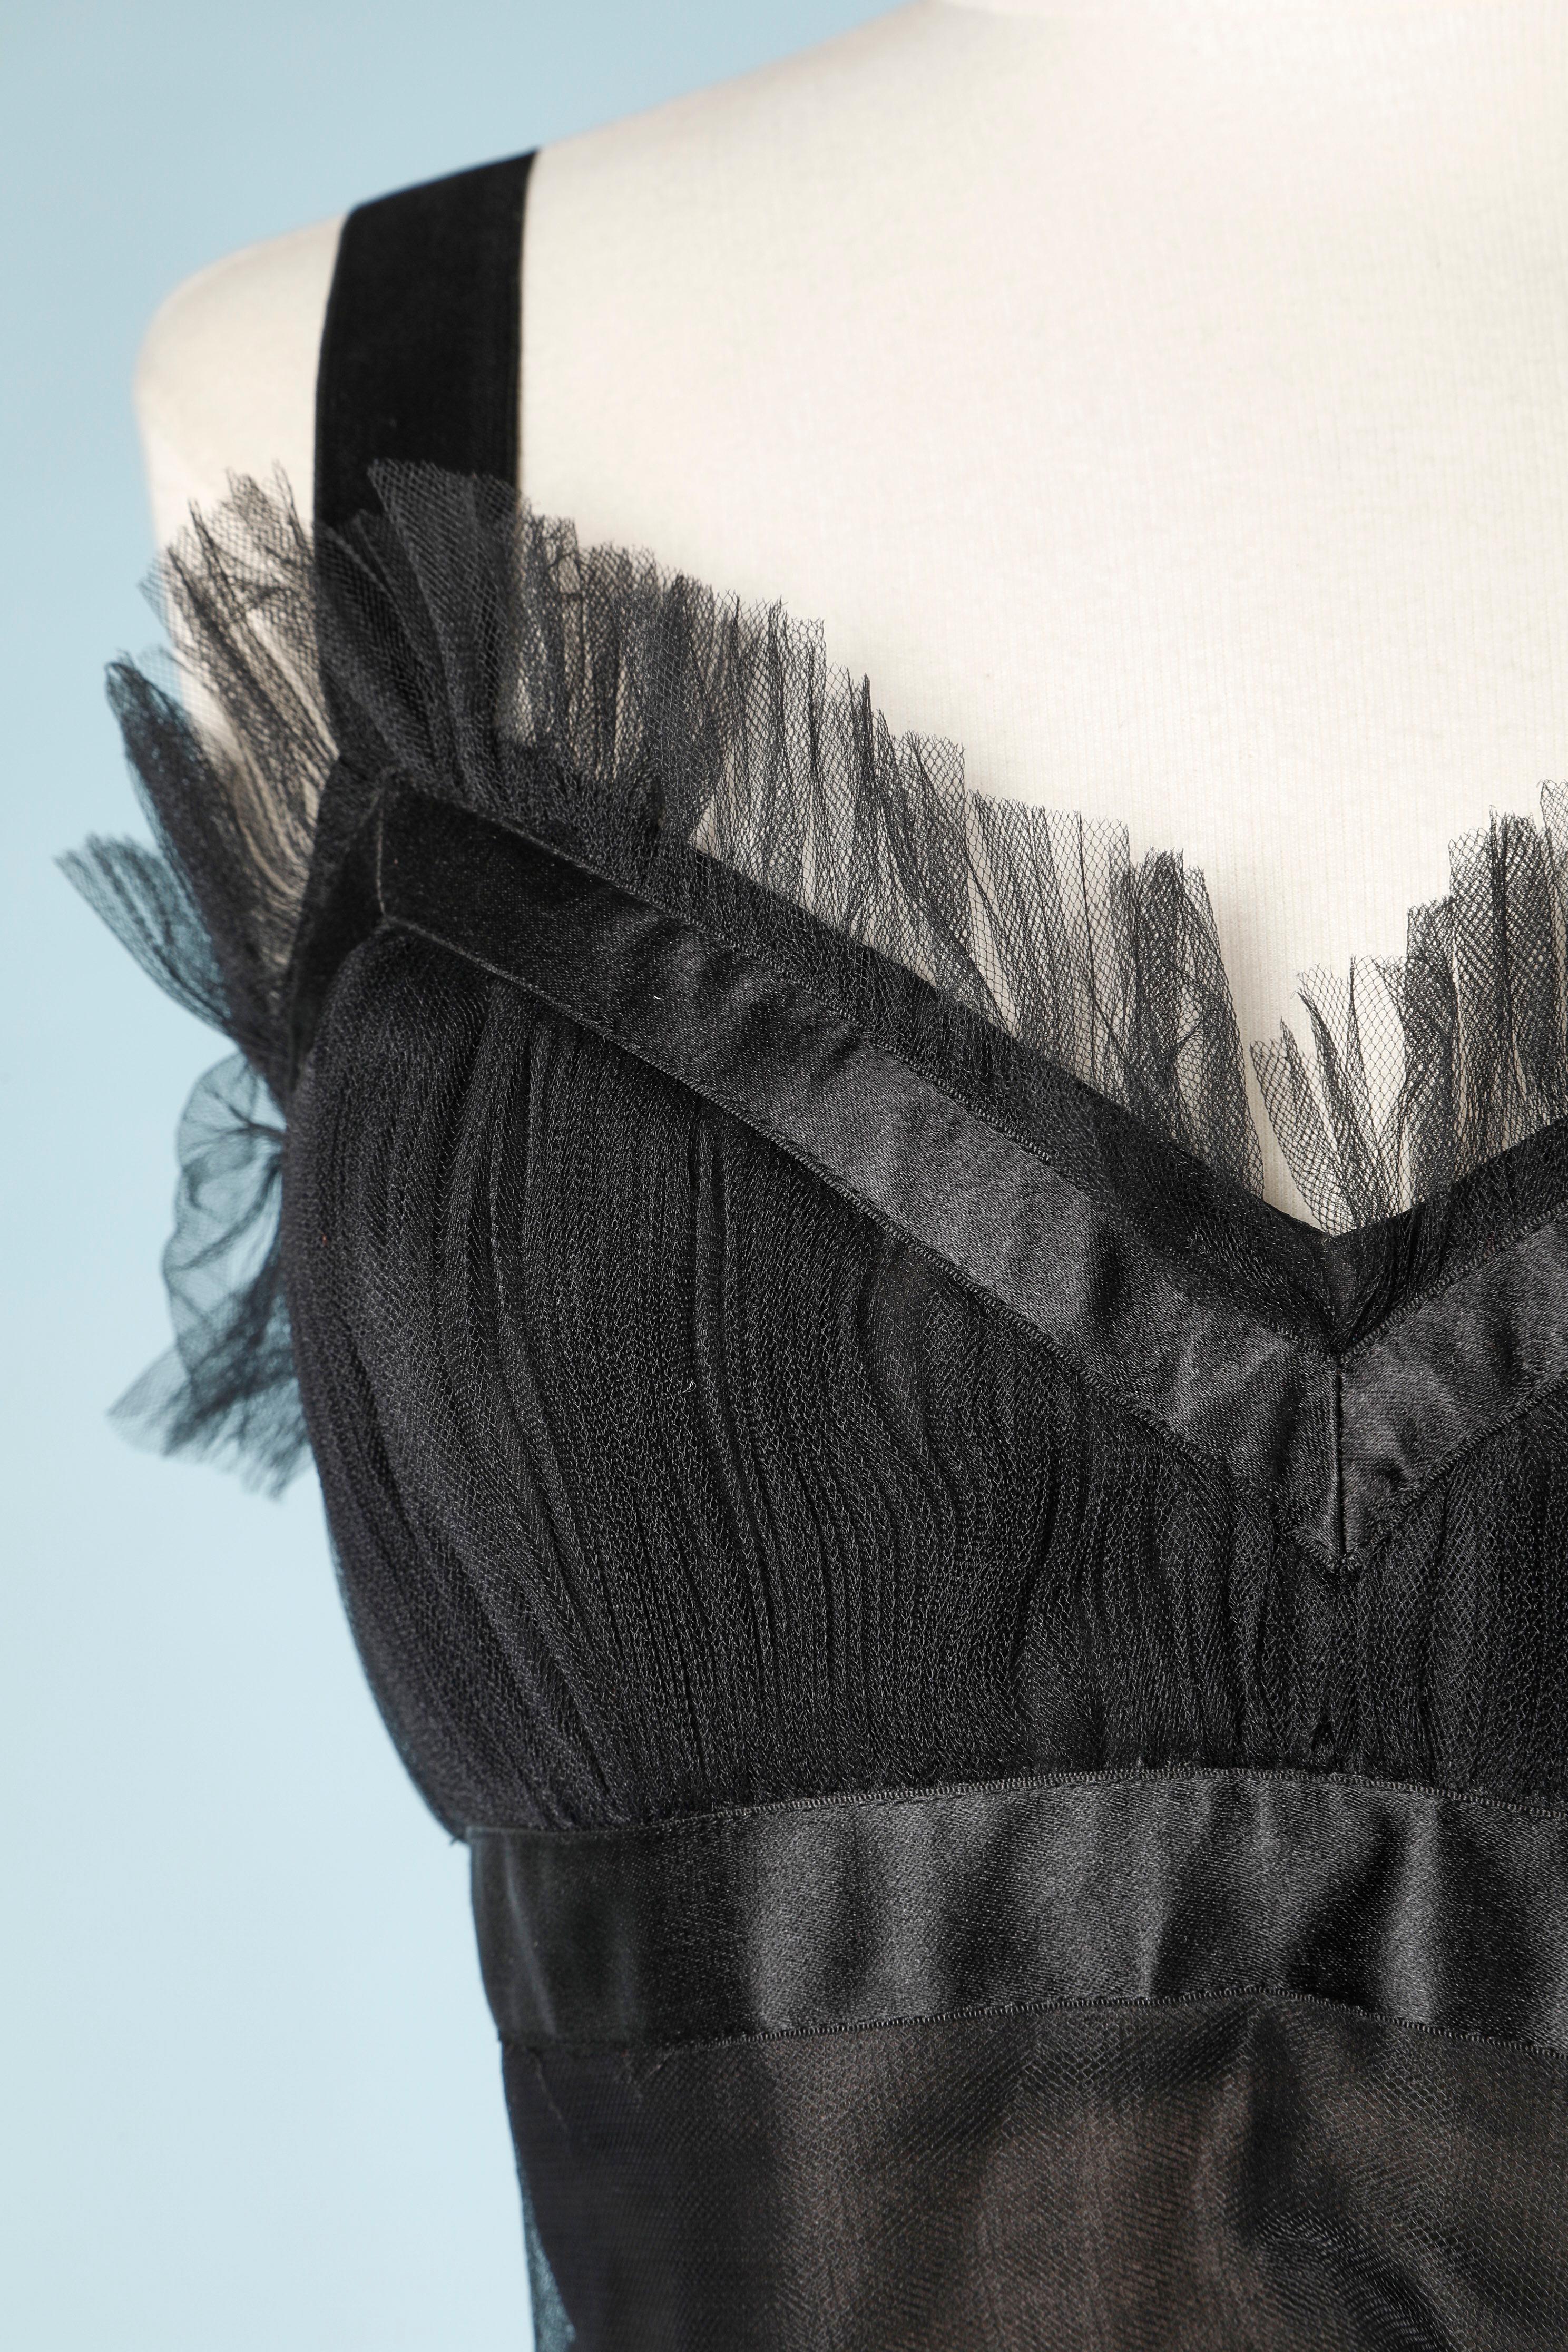 Cocktail top and skirt in black plated tulle and ruffle. Wired bra inside the top. 
Weight (lead) inside the skirt hem 
SIZE S